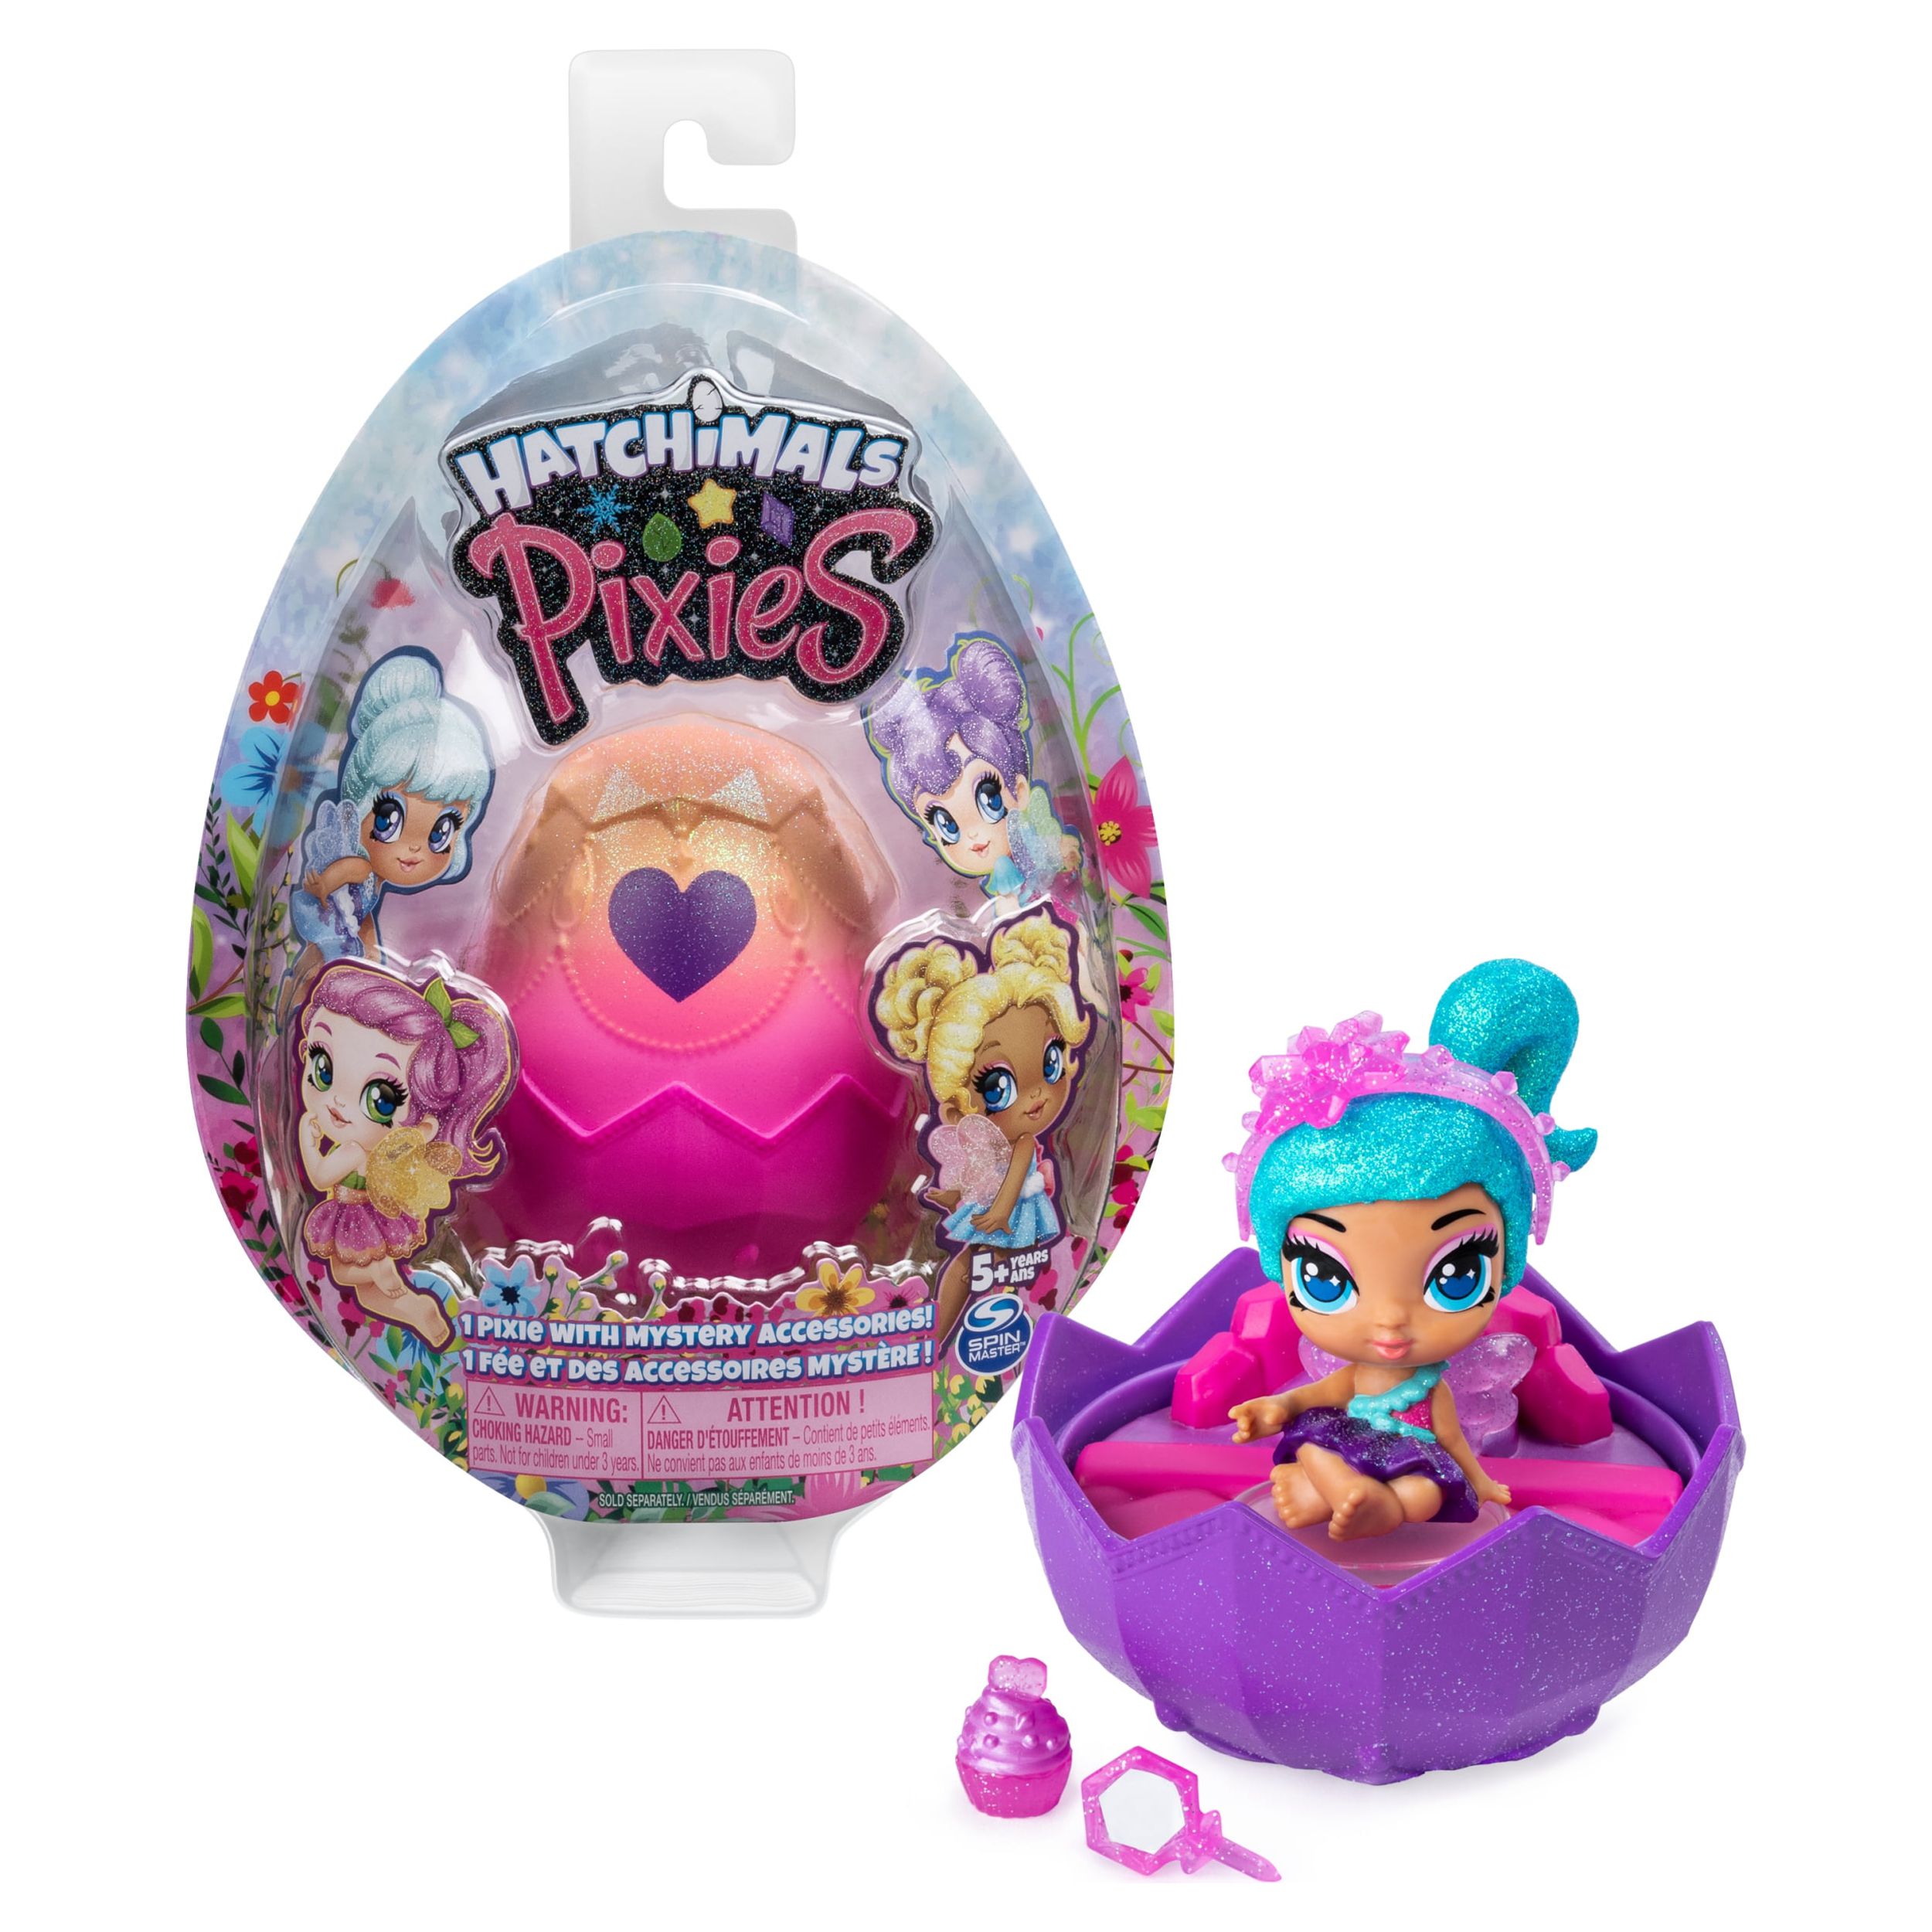 Hatchimals Pixies, 2.5-Inch Collectible Doll and Accessories (Styles May Vary), for Kids Aged 5 and Up - image 1 of 10